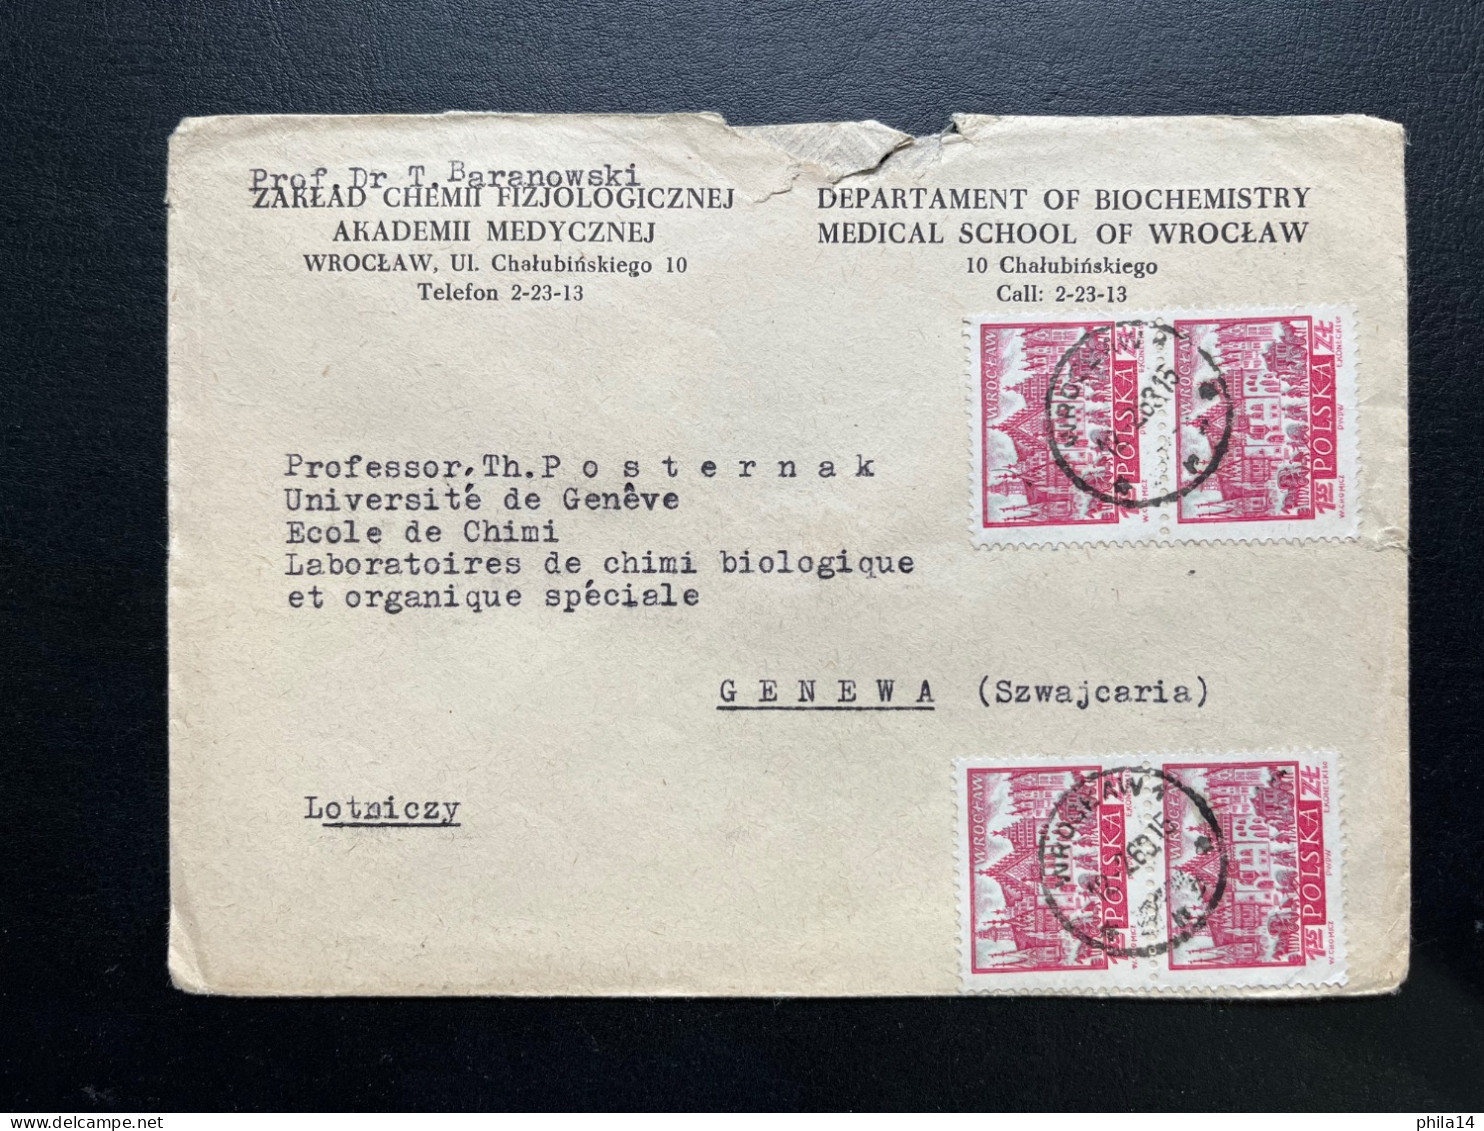 ENVELOPPE POLOGNE POLSKA / WROCLAW POUR GENEVE SUISSE 1960 - Covers & Documents